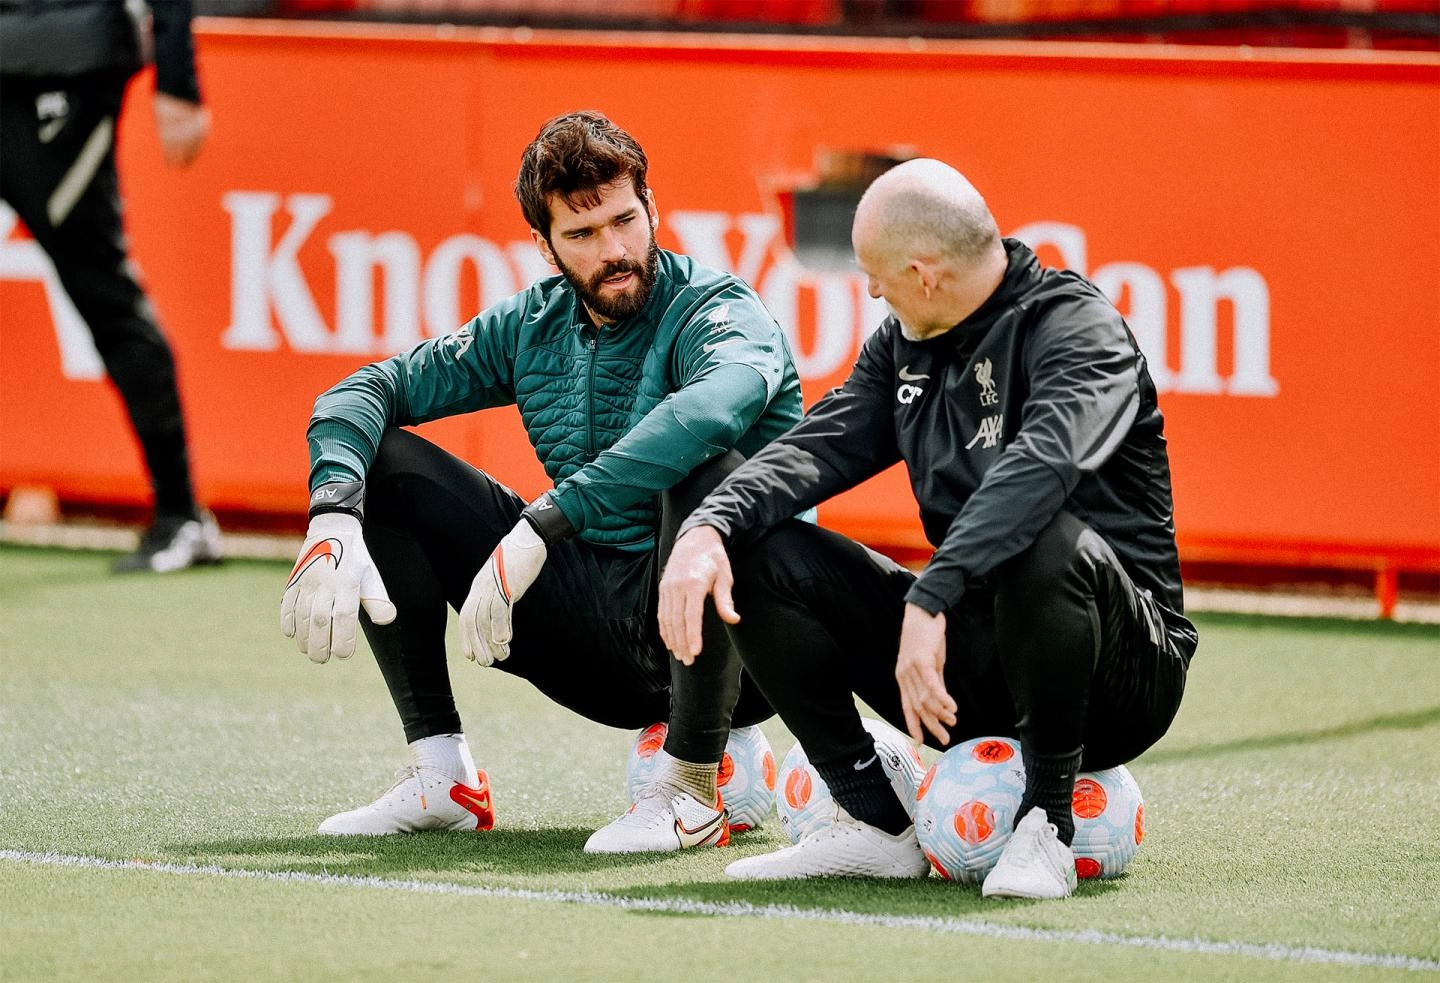 Alisson and Taffarel: Colleagues with club and country